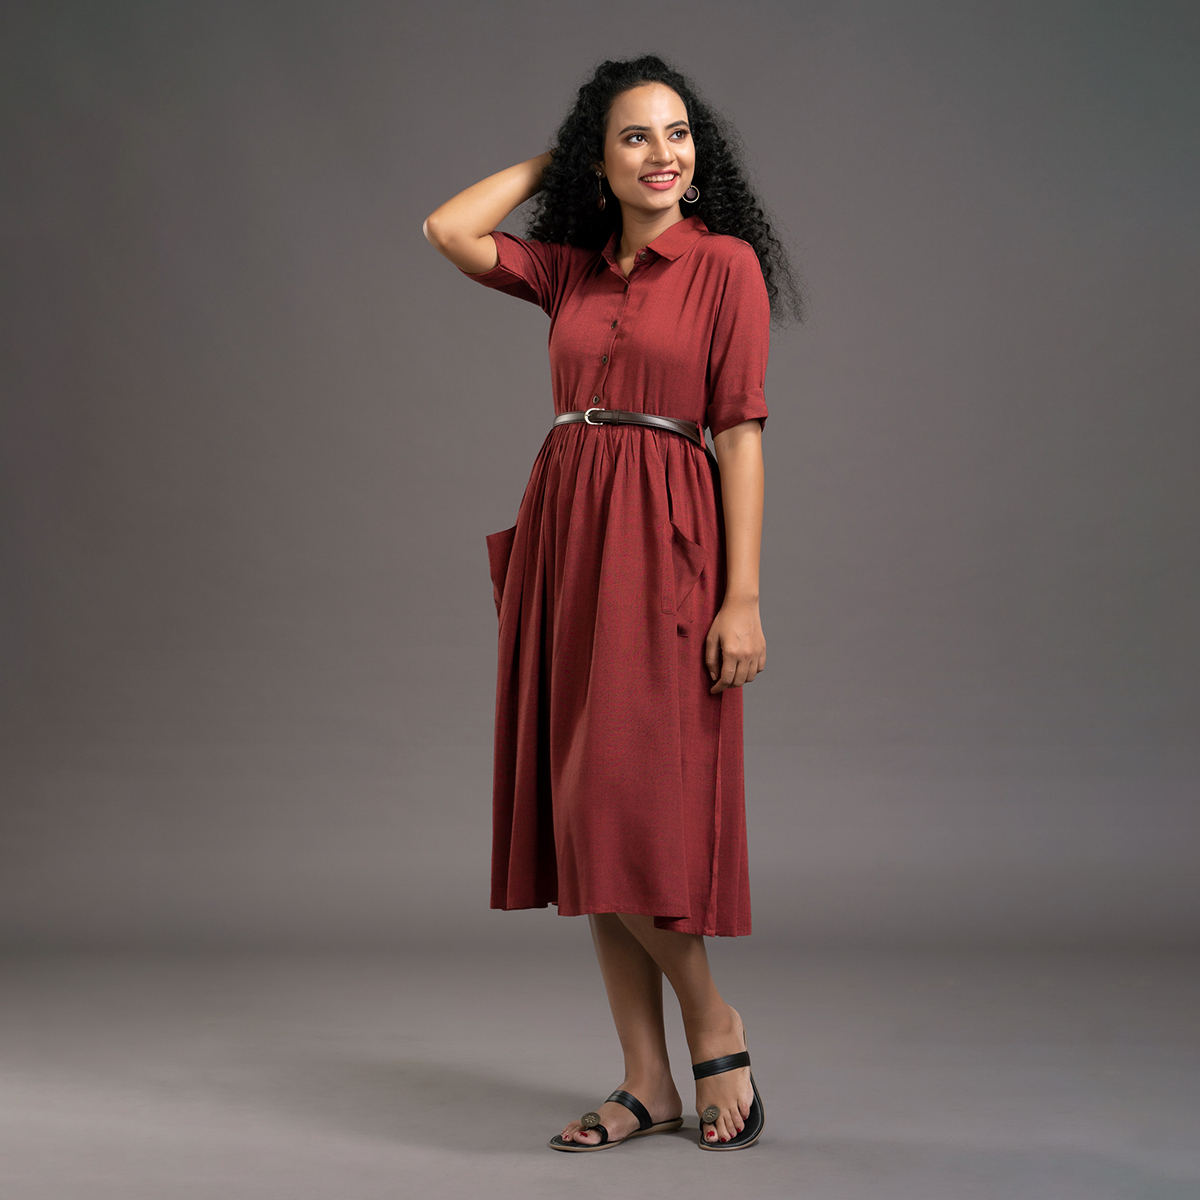 Zella Solid Color Shirt Midi Dress styled with Patch Pockets & Waist belt - Maroon